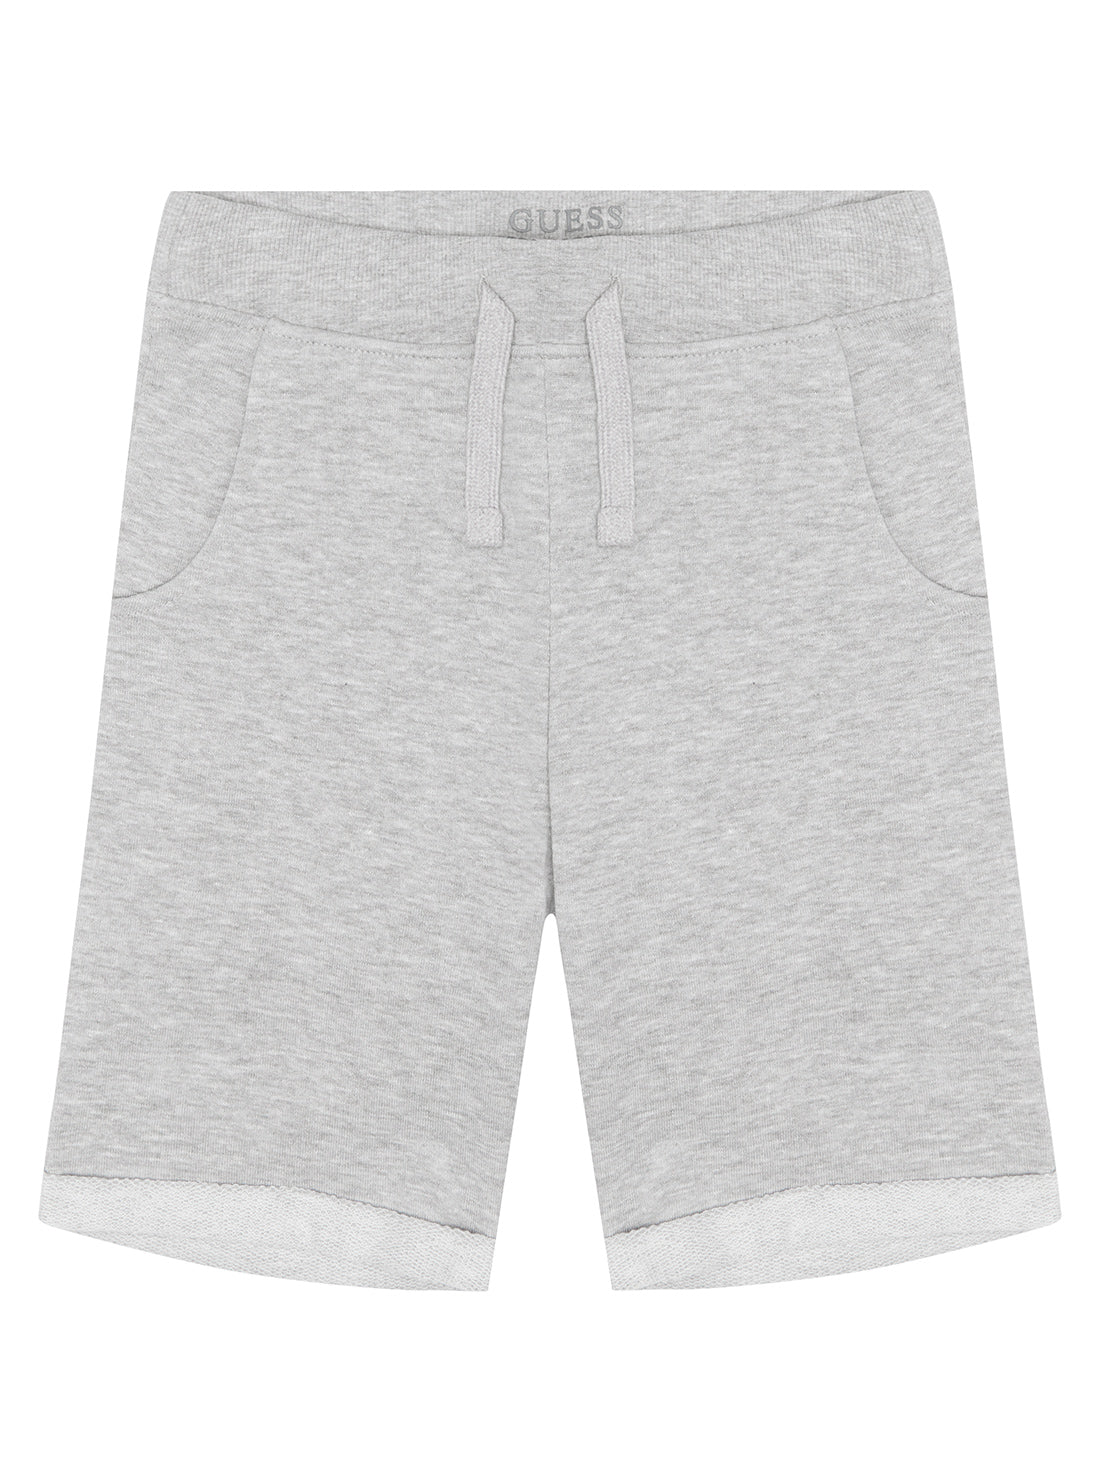 GUESS Little Boy Grey Active Shorts (2-7) N93Q18KAUG0 Front View